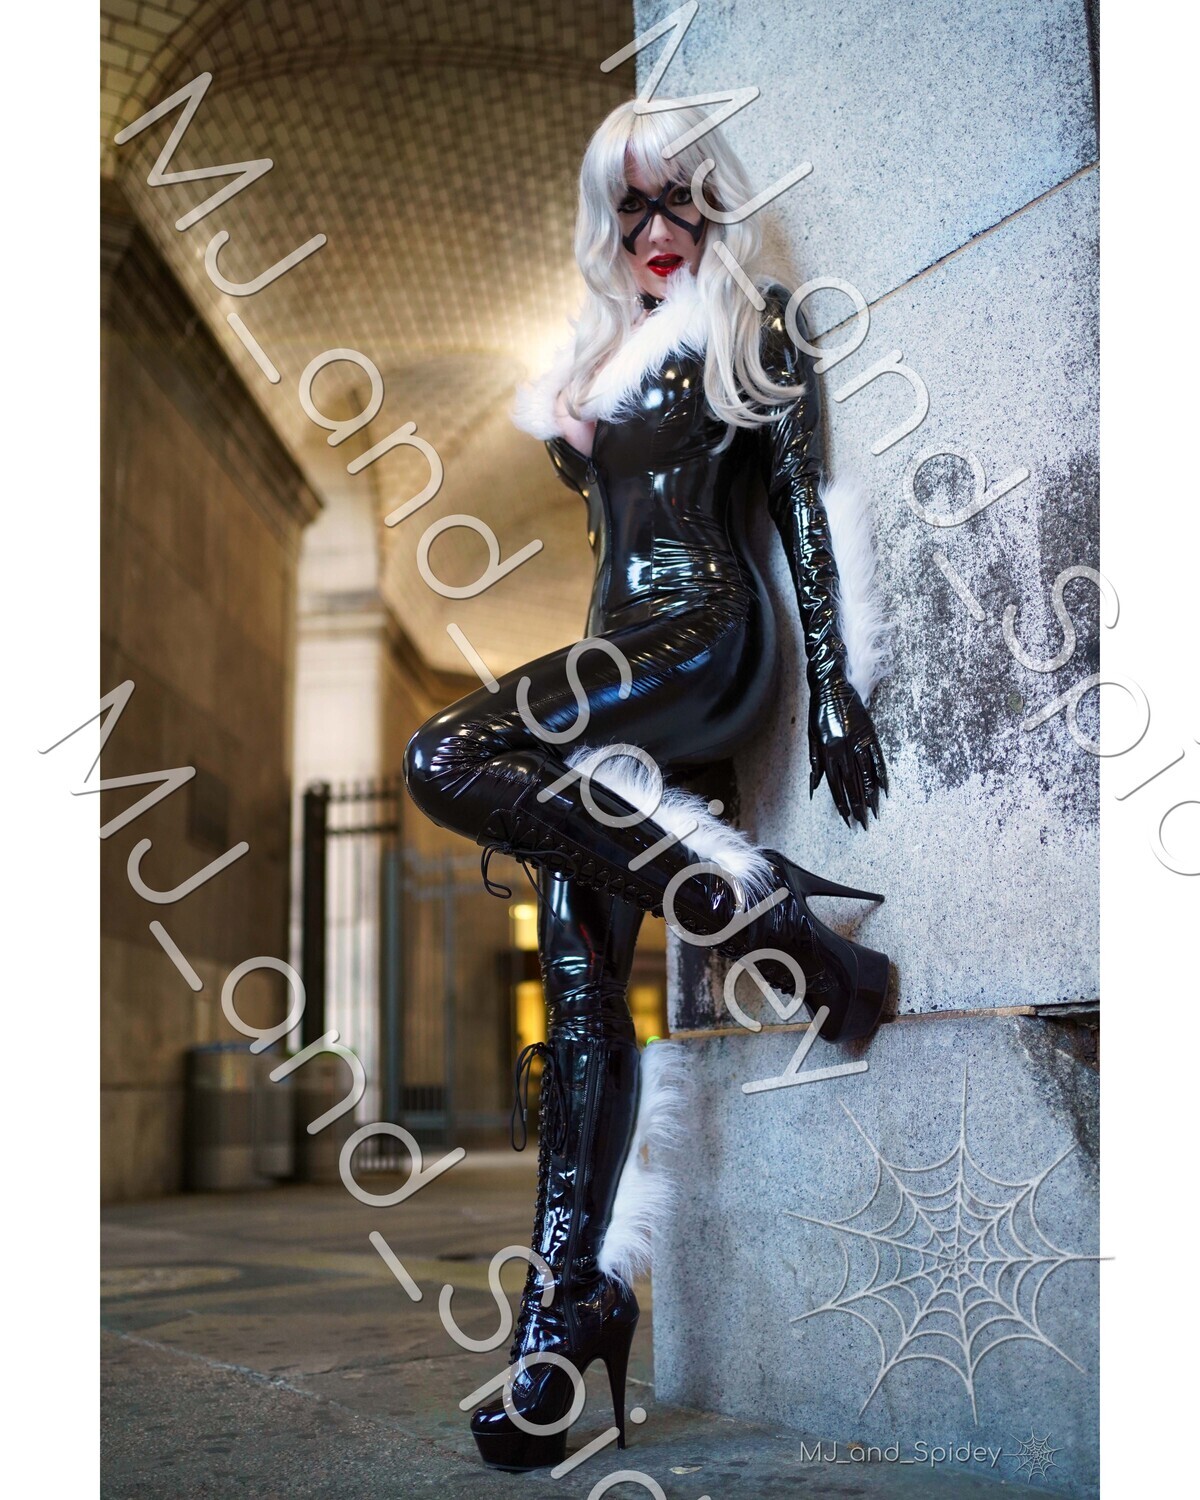 Marvel - Spider-Man - Black Cat - Latex 1 - Digital Cosplay Image (@MJ_and_Spidey, MJ and Spidey, Comics)